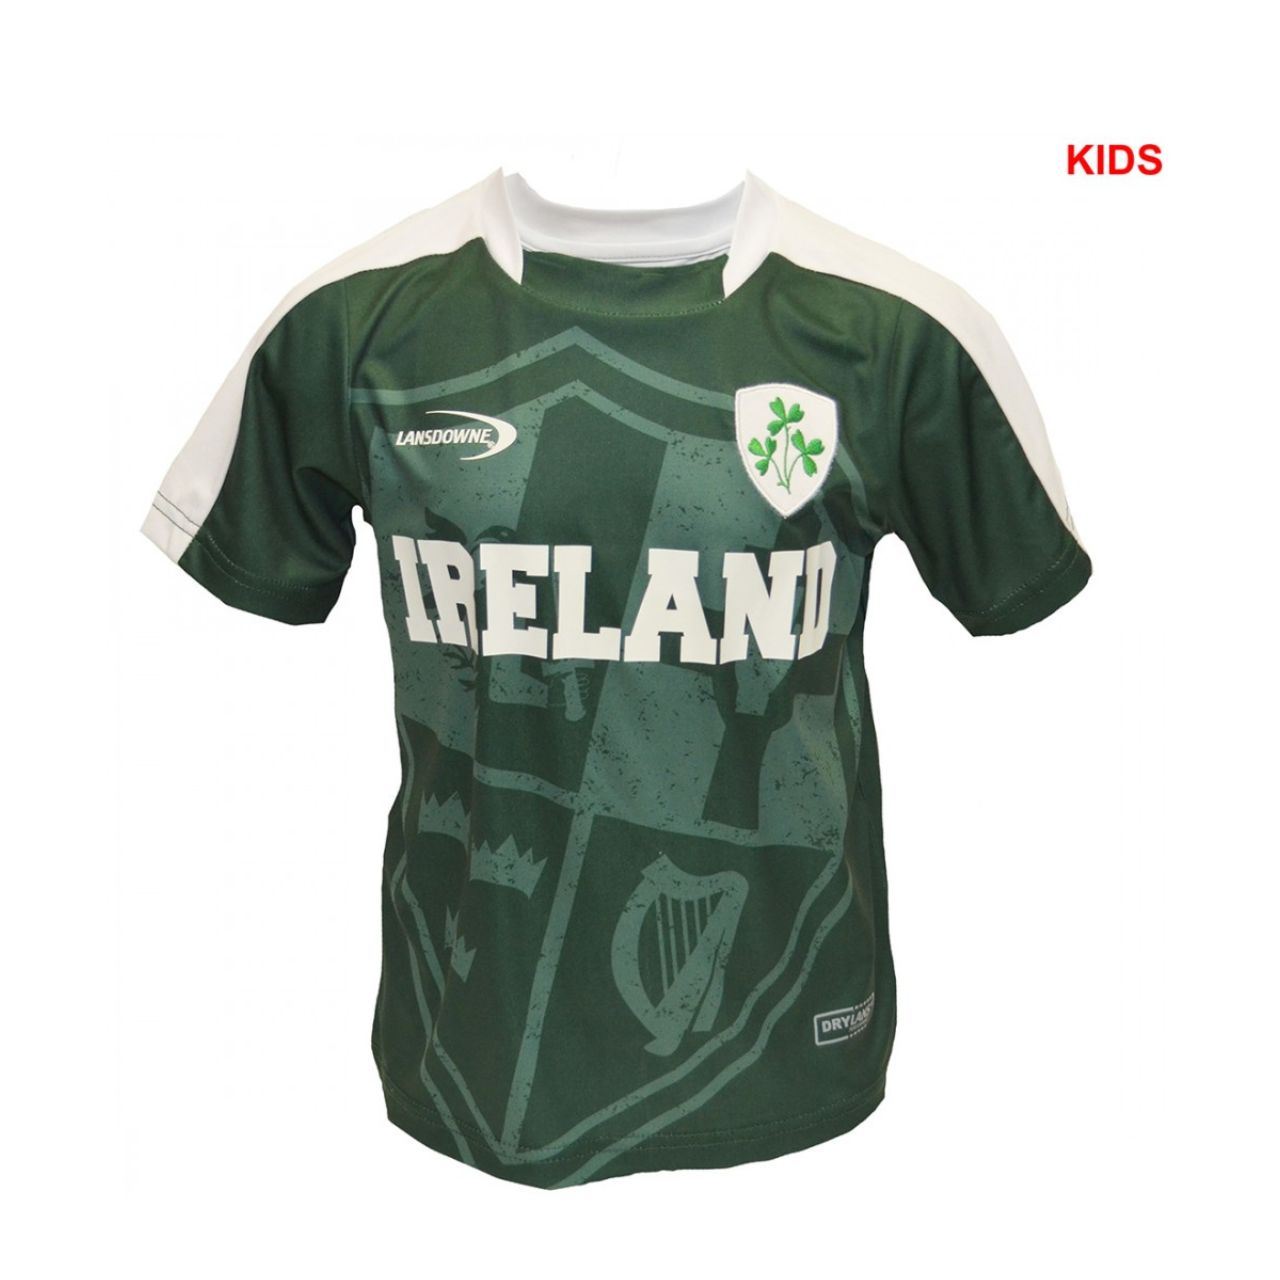 Lansdowne Sports Official Collection Bottle Green Sublimated Kids Top  Bottle green sublimated kids top is part of the Lansdowne Sports Official Collection. This sporty top has Ireland's Four Province crest sublimated within the top itself.  Shamrock badge and embroidered logo.